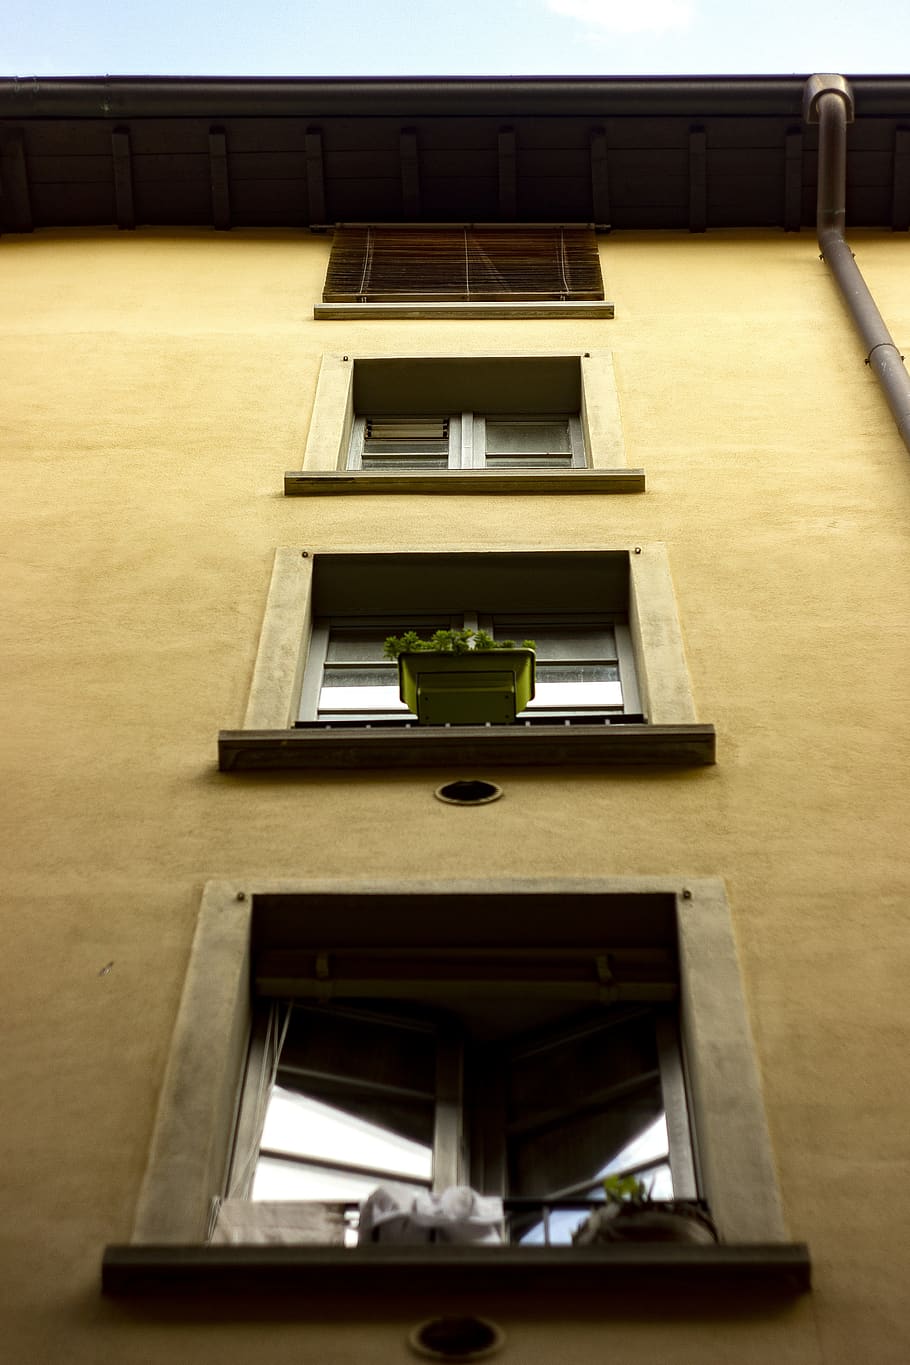 green potted plant on window, building, housing, italy, province of bergamo, HD wallpaper